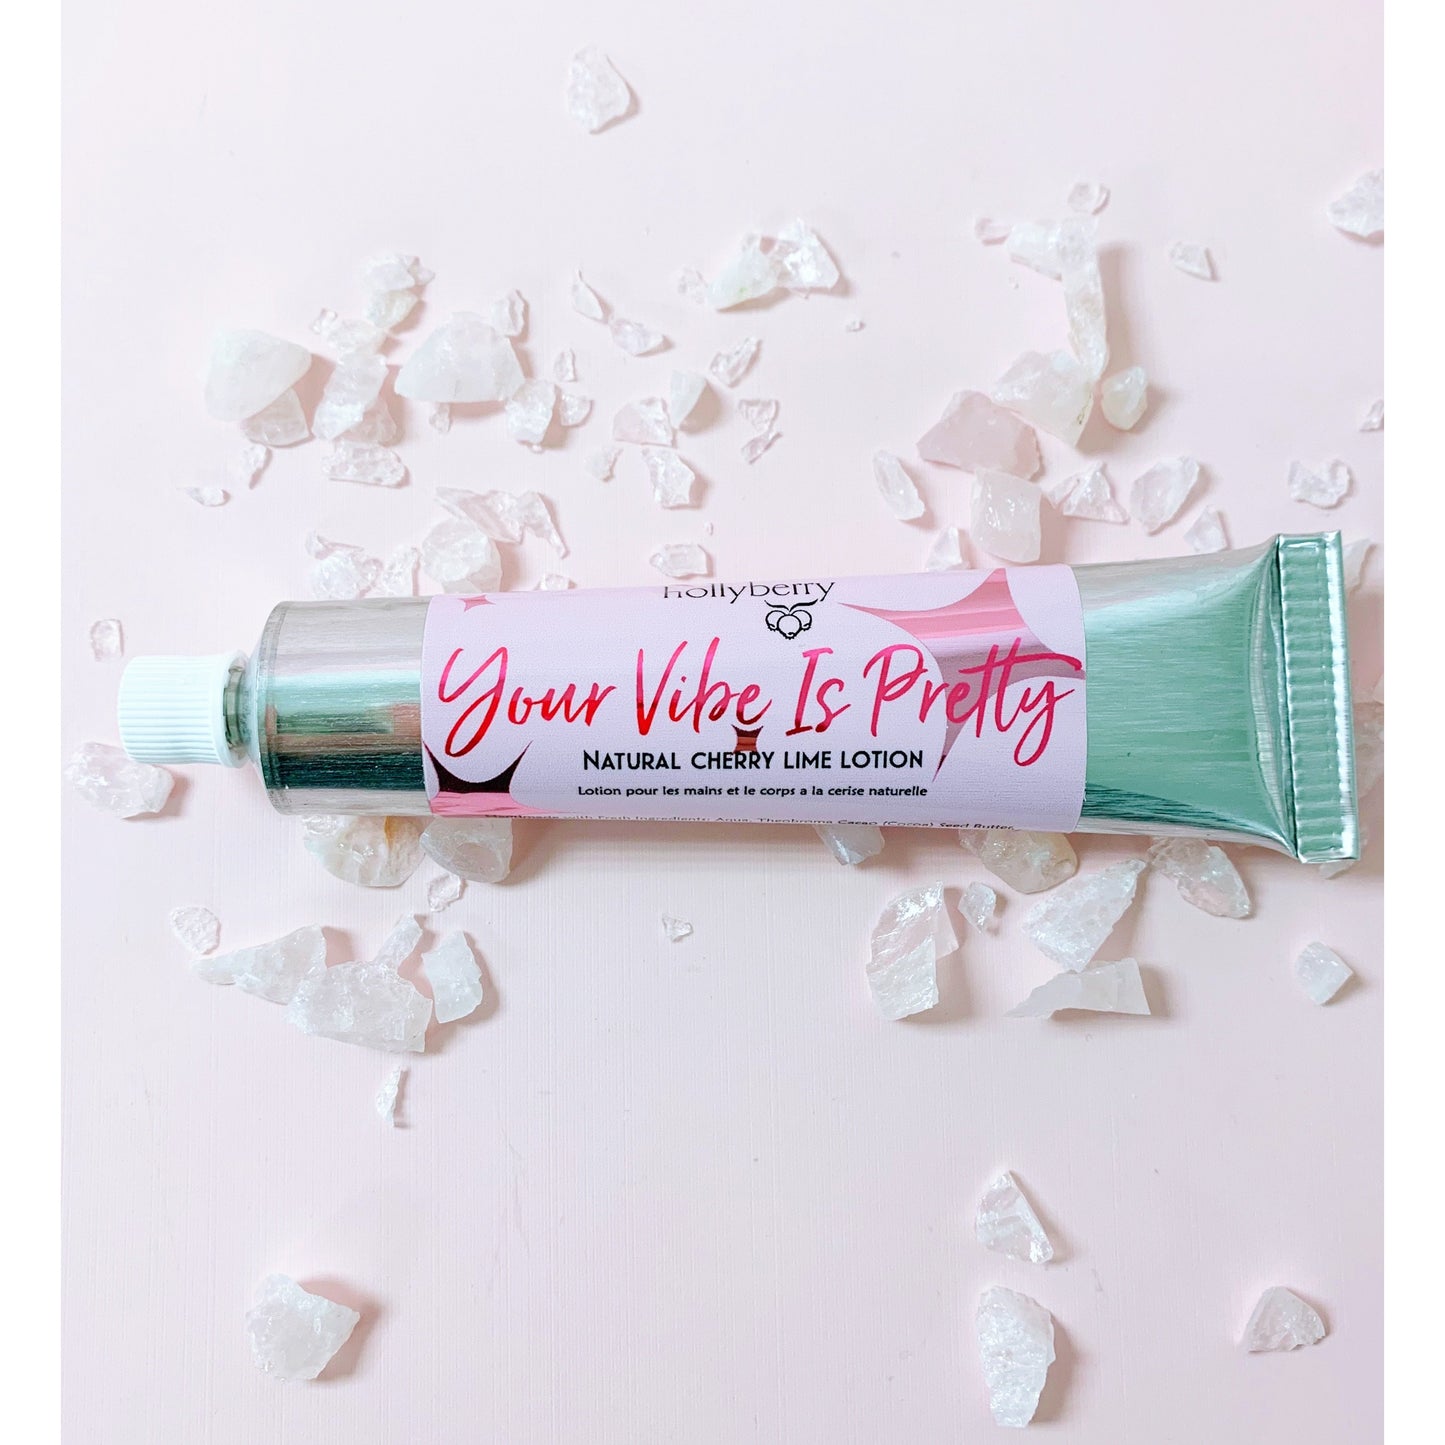 Your Vibe is Pretty - Cherry Lime Hand & Body Lotion